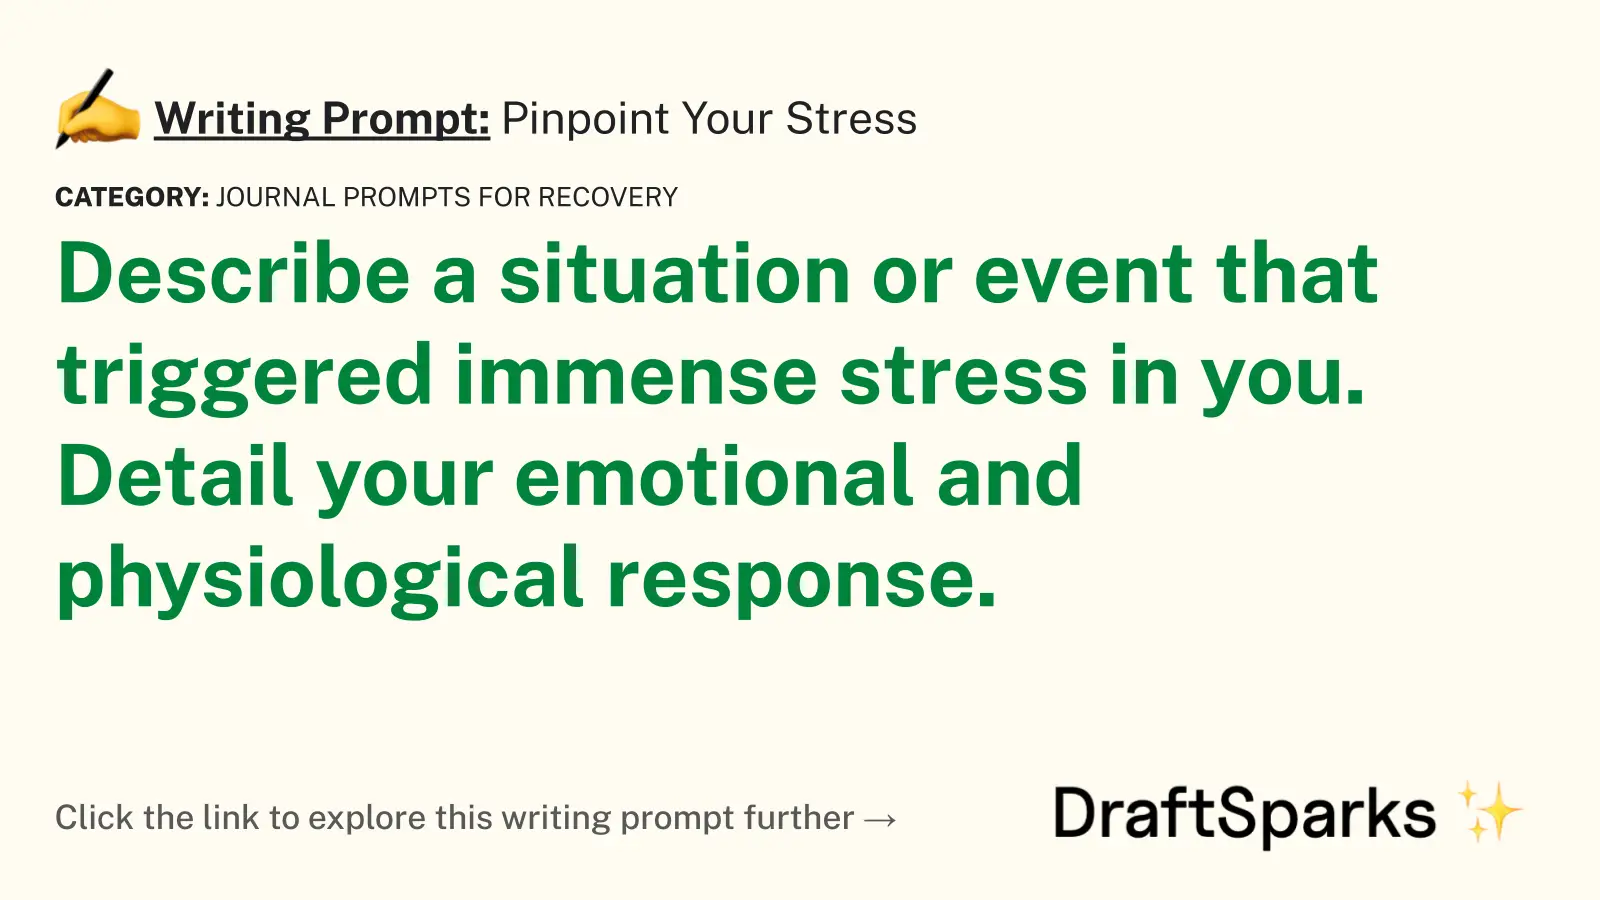 Pinpoint Your Stress